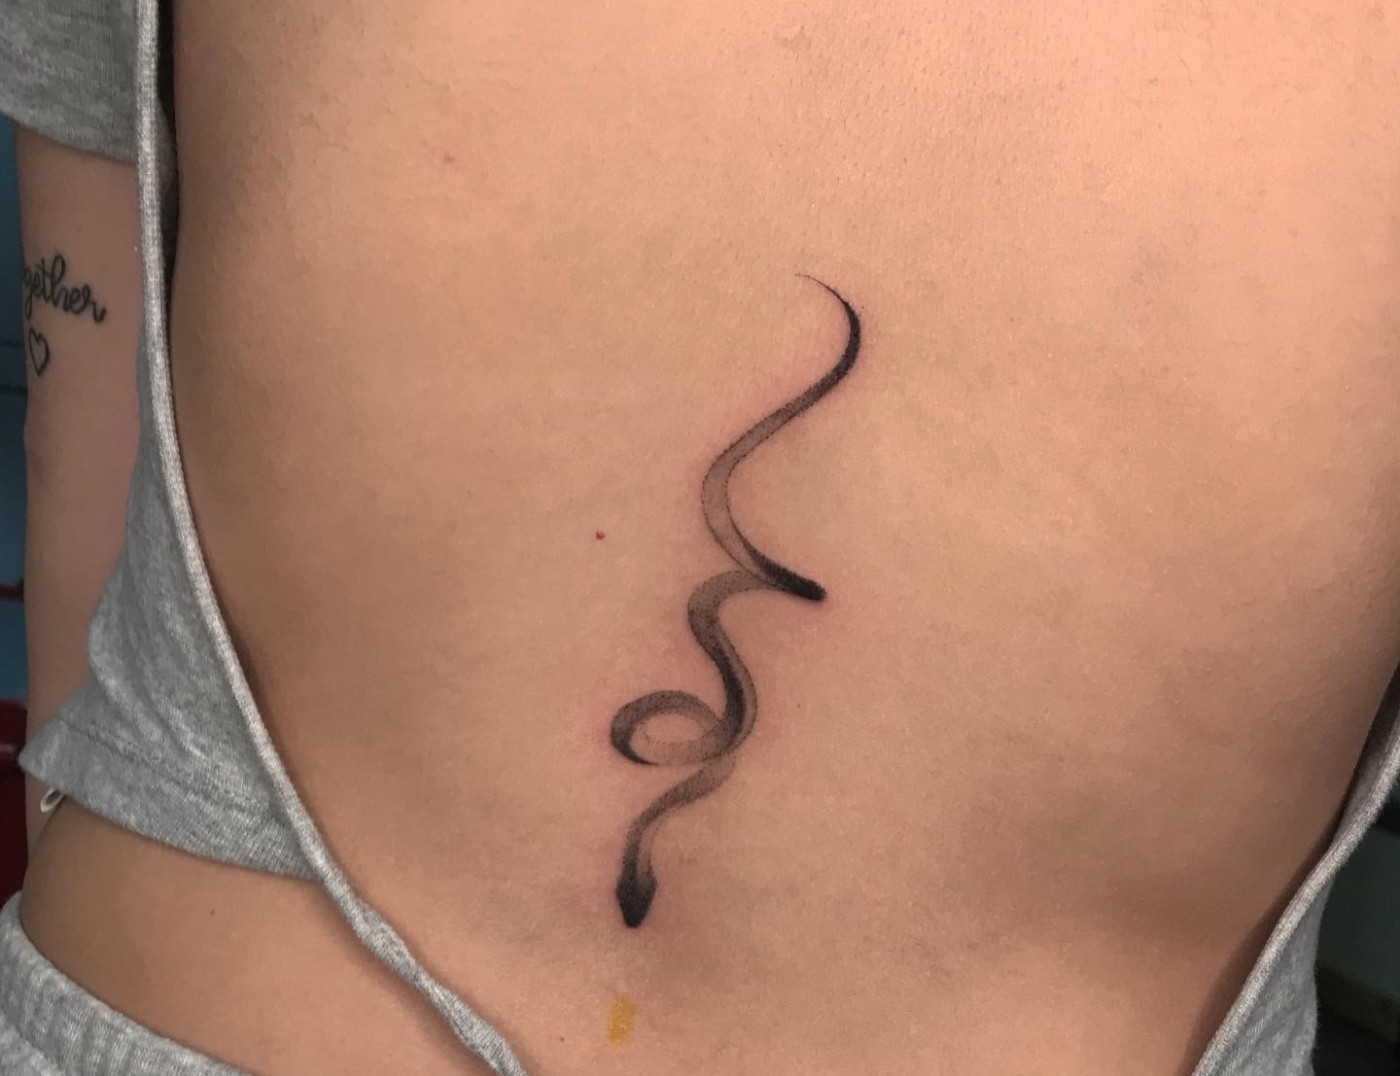 Small Fine Line Snake Black Work Tattoo by Rene Cristobal, A guest Artist at Iron Palm Tattoos. Rene comes to us from Concepcion, Chile. He specializes in black & gray and blackwork tattoos. He is available for booking begging September 11th, 2023. We're open late night until 2AM most nights. Call 404-973-7828 or stop by for a free consultation. Walk-Ins are welcome.